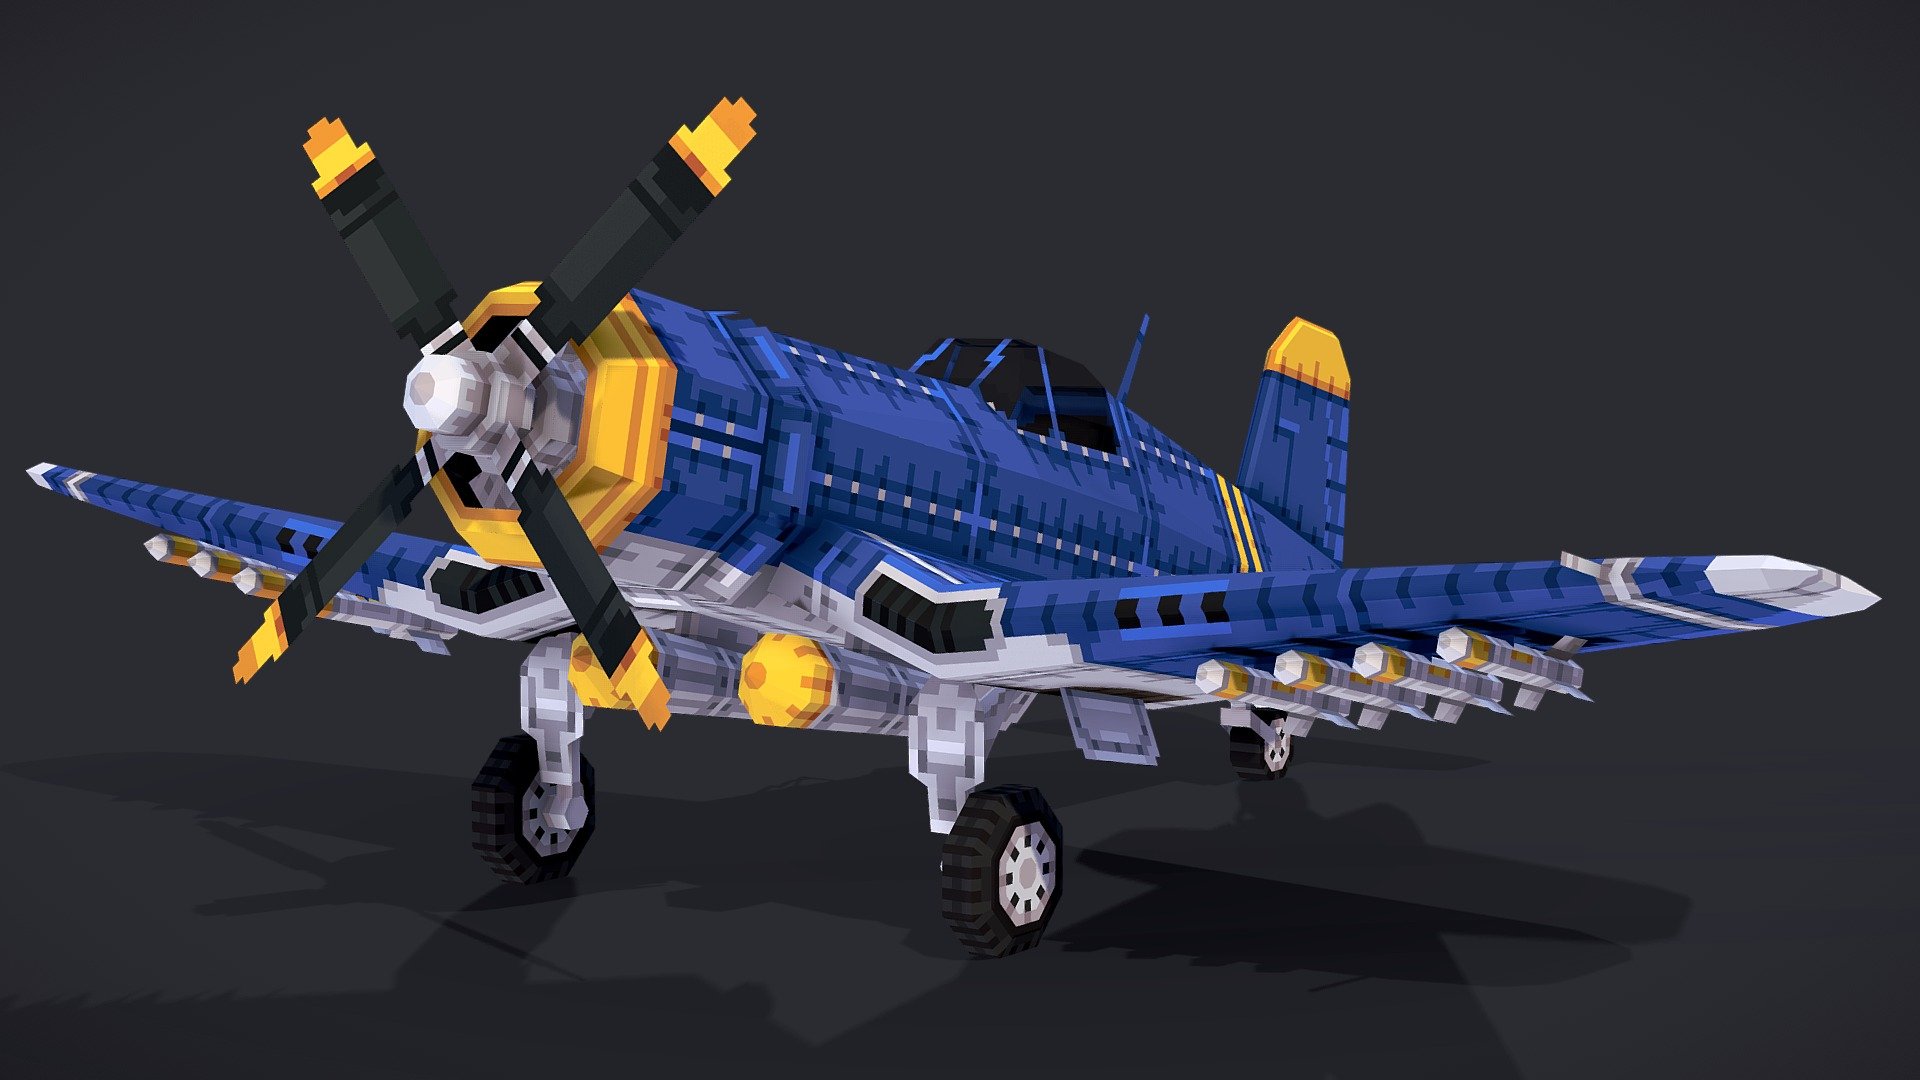 Fighter plane.
Made with Blockbench

More information about this model on:
https://grafisch.media/

 - Fighter plane - Download Free 3D model by Jelle (@Grafisch) 3d model